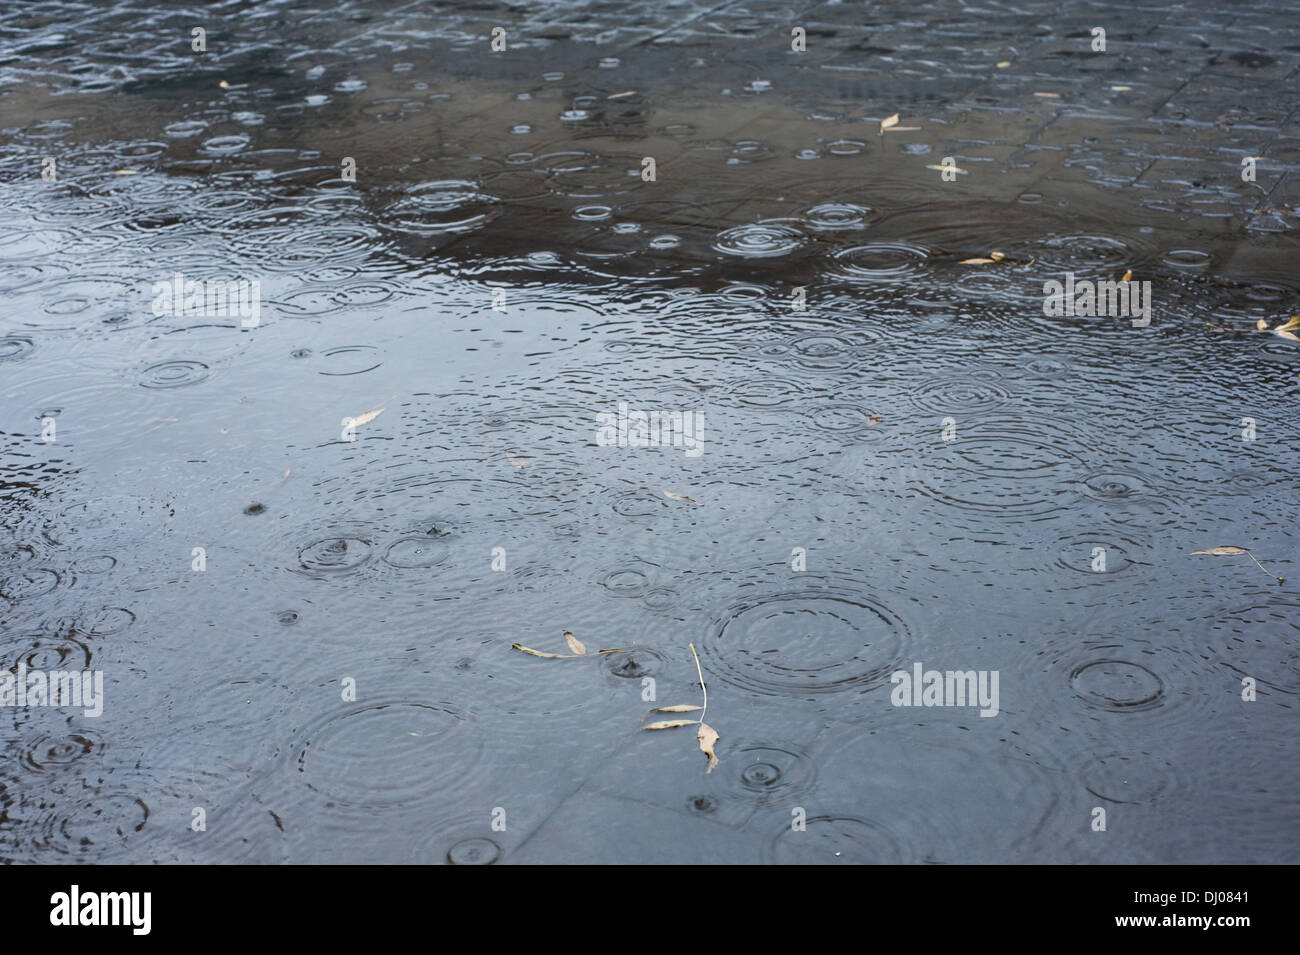 autumn rain water texture with drops on pavement Stock Photo